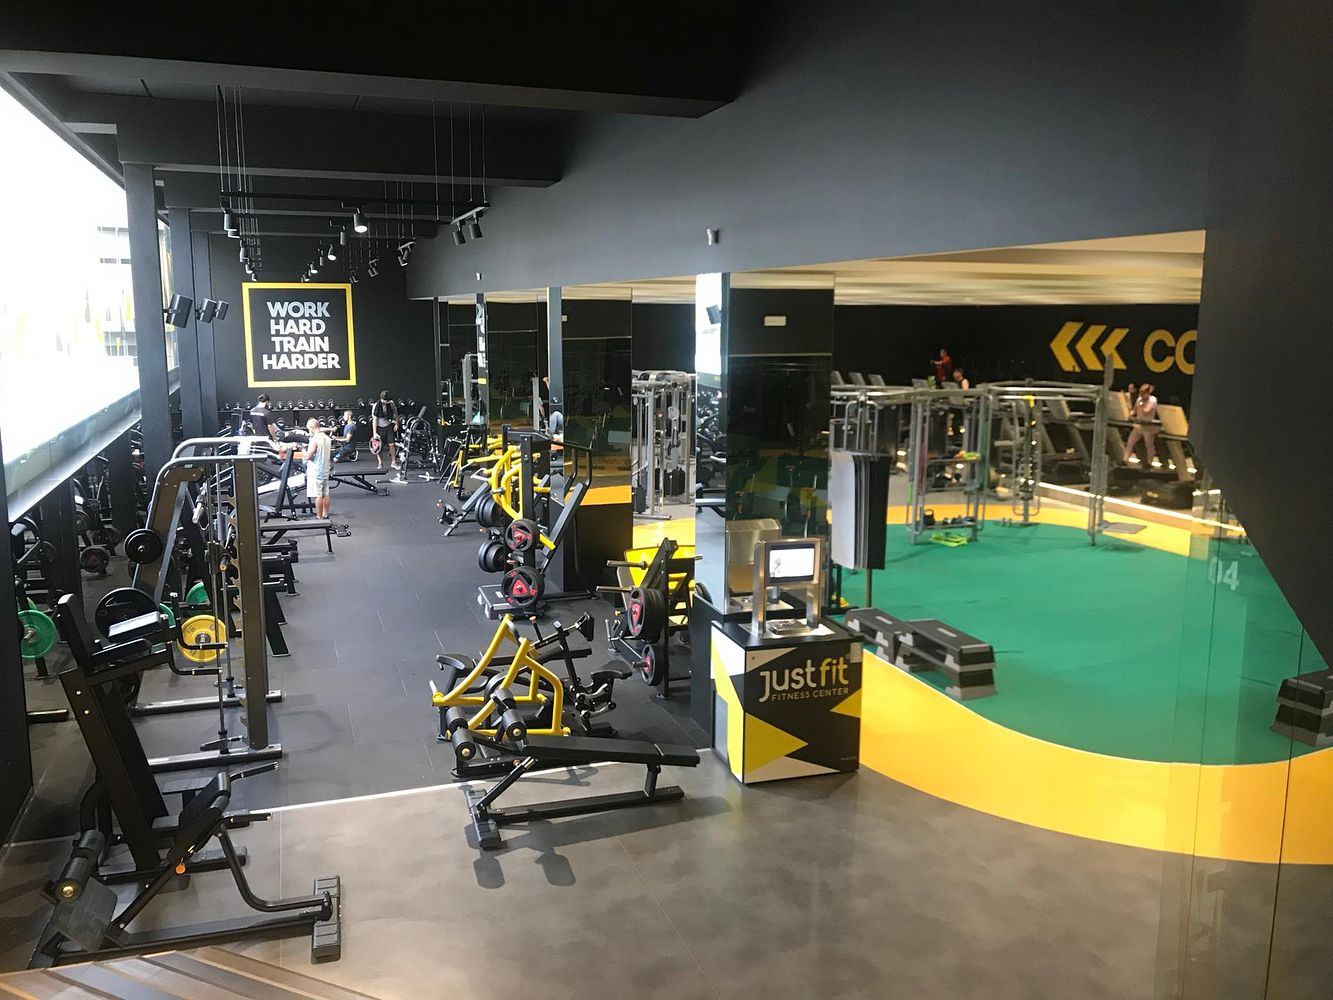 Justfit Maia gym in Maia, Portugal